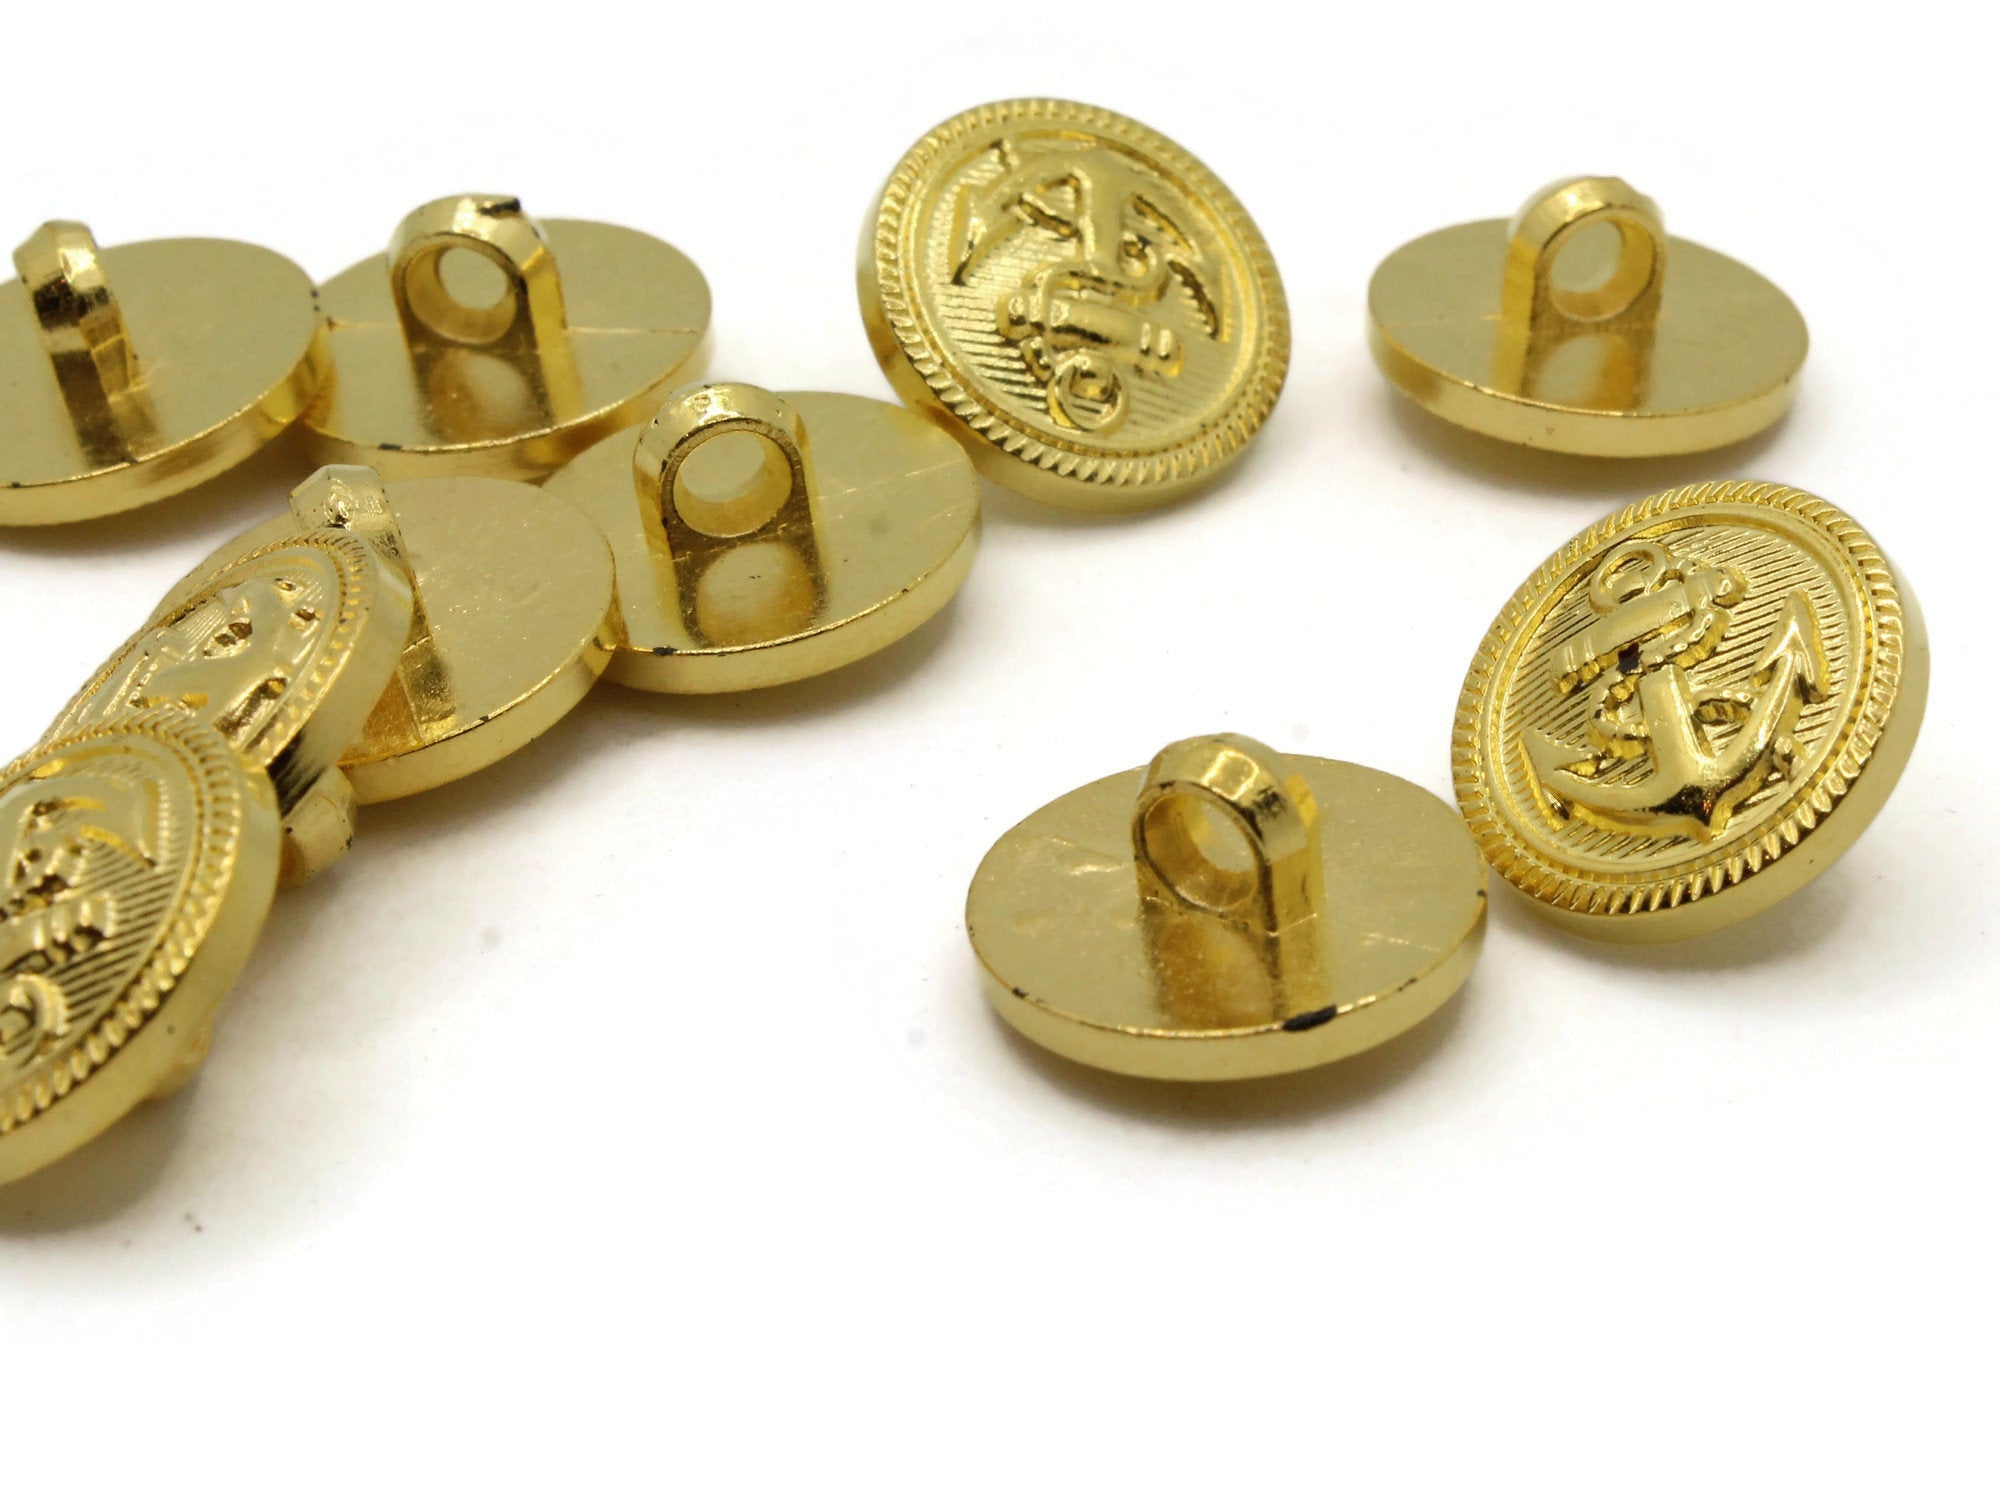 Small Gold Anchor Buttons – At the Sign of the Golden Scissors